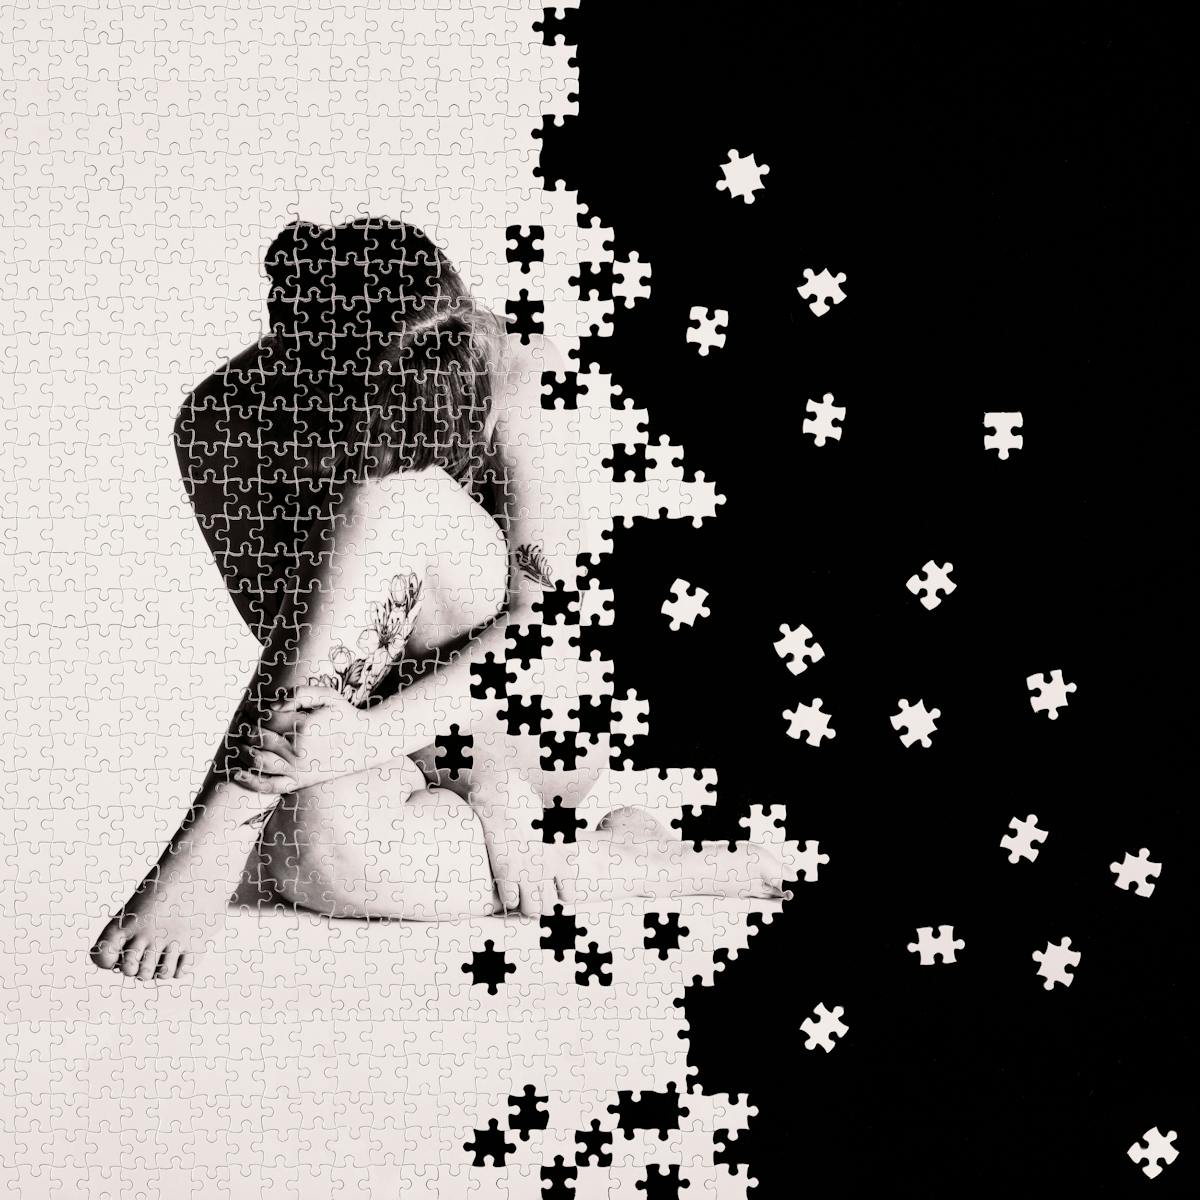 Photograph of a part made jigsaw puzzle containing hundreds of pieces. The jigsaw has been photographed against a black background, with many of the unused pieces scattered around in the black space. The image on the jigsaw is a warmed toned, monotone photograph of a nude woman against a plain light background. The woman is seated on the floor with her legs and arm crossed across her body, her head resting on her left knee such that her face cannot be seen. On her arm and leg are tattoos. The missing jigsaw pieces create a black void which encroaches from the right side of the image, fragmenting the image of the woman.